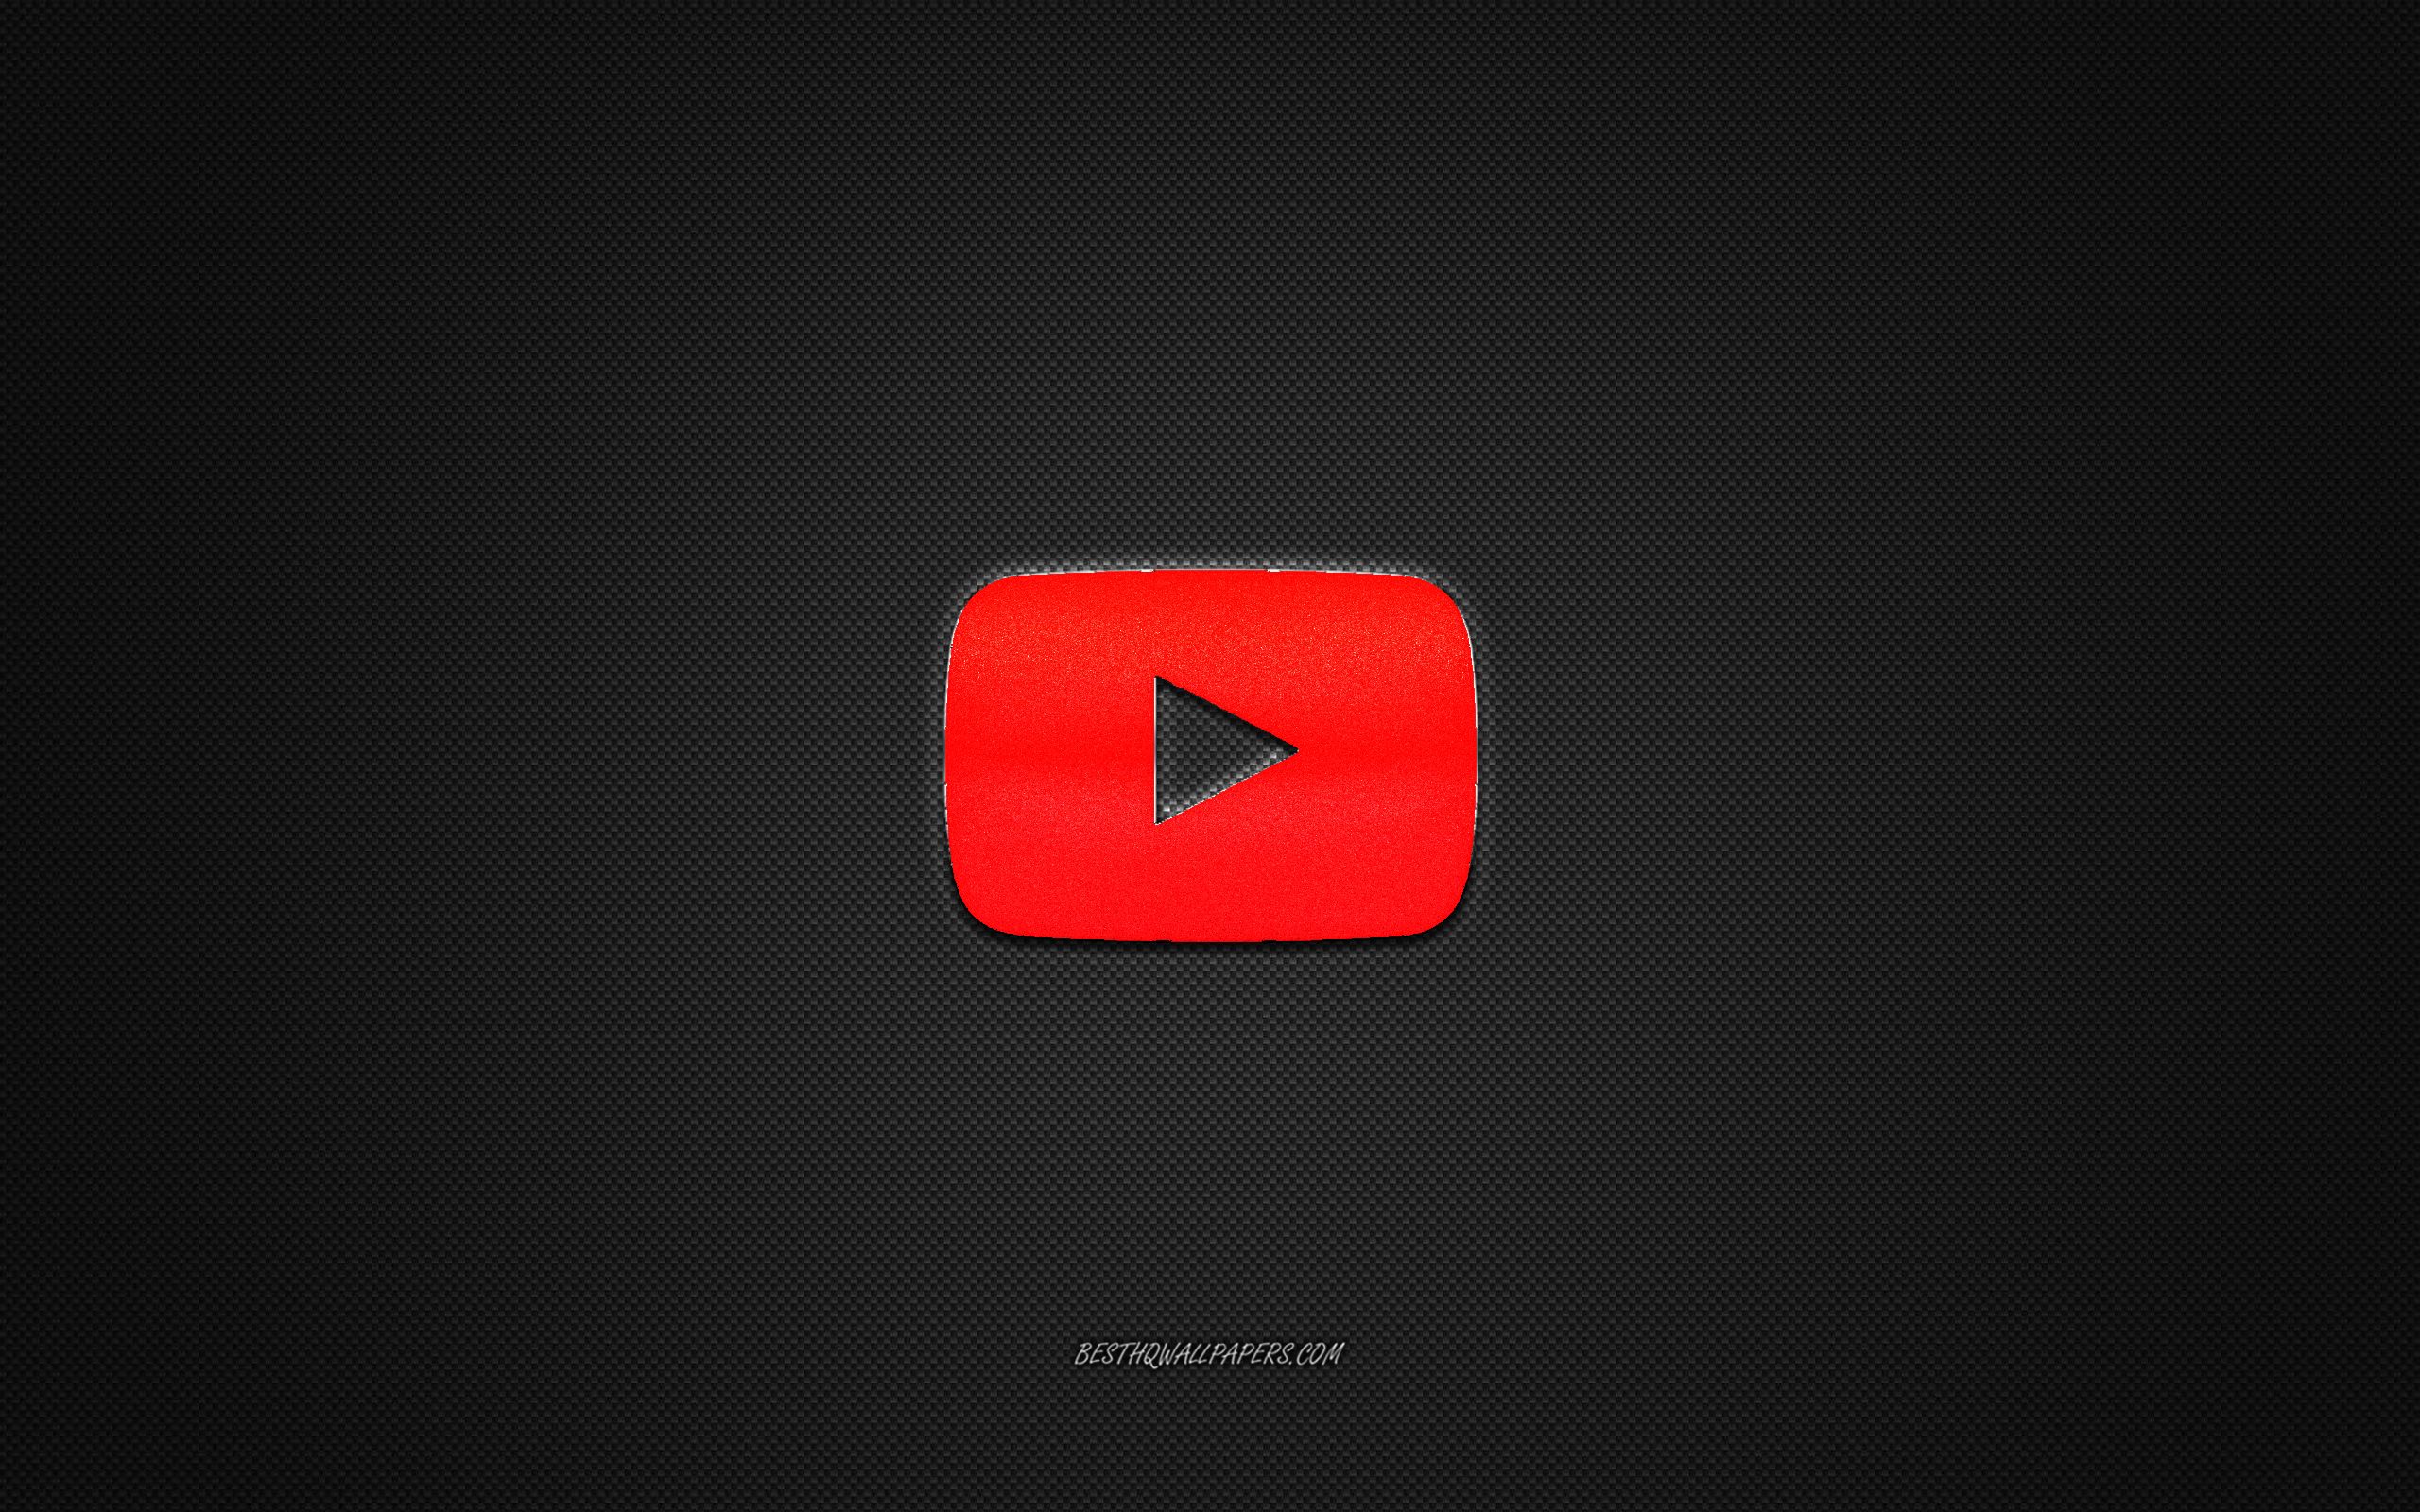 Download wallpaper YouTube logo, red shiny logo, YouTube metal emblem, gray carbon fiber texture, YouTube, brands, creative art for desktop with resolution 2560x1600. High Quality HD picture wallpaper